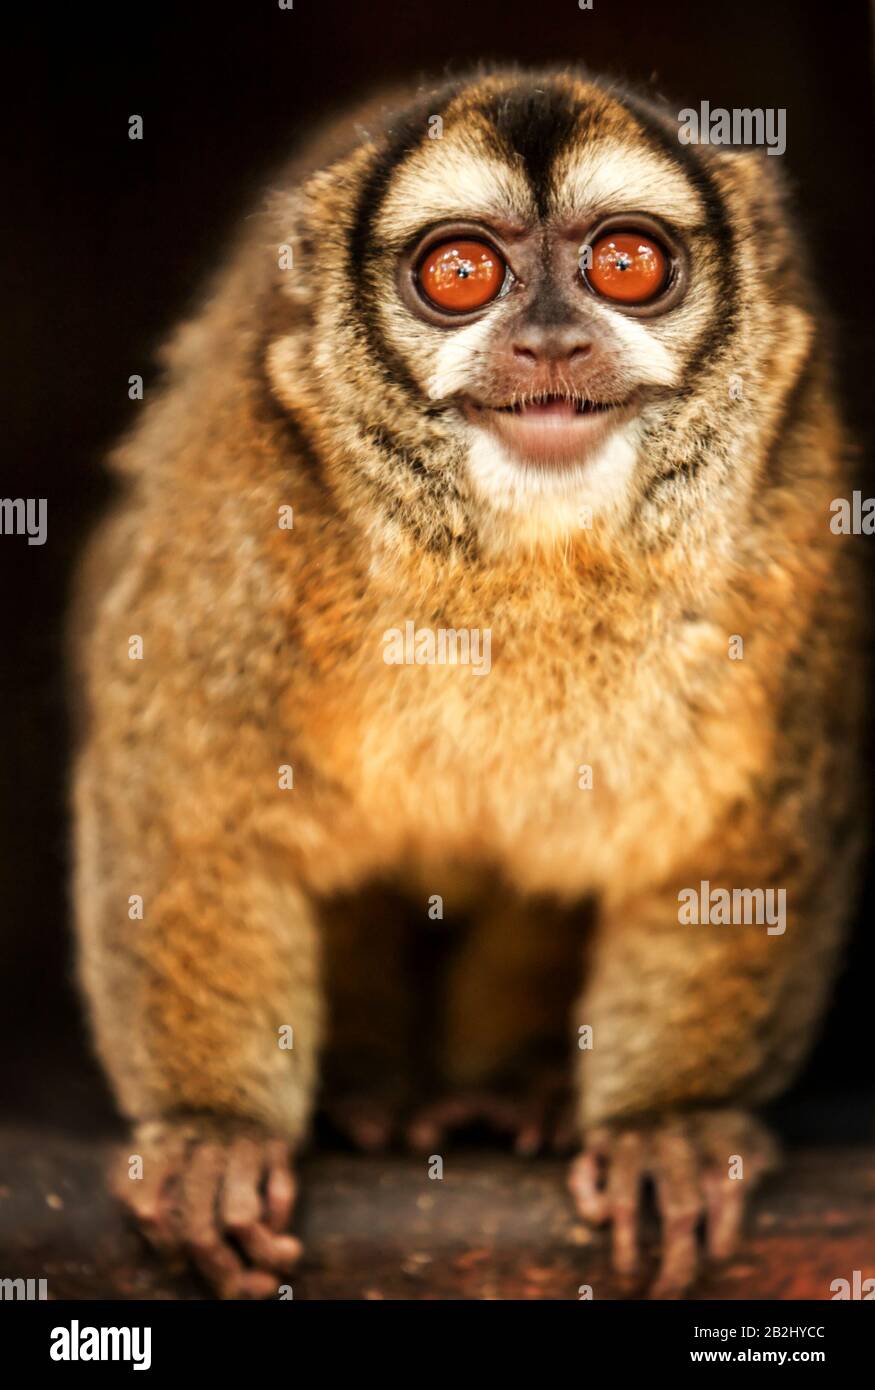 Owl Monkey Laughing At Spectators Shoot In A Animal Refuge In Brasil Stock  Photo - Alamy